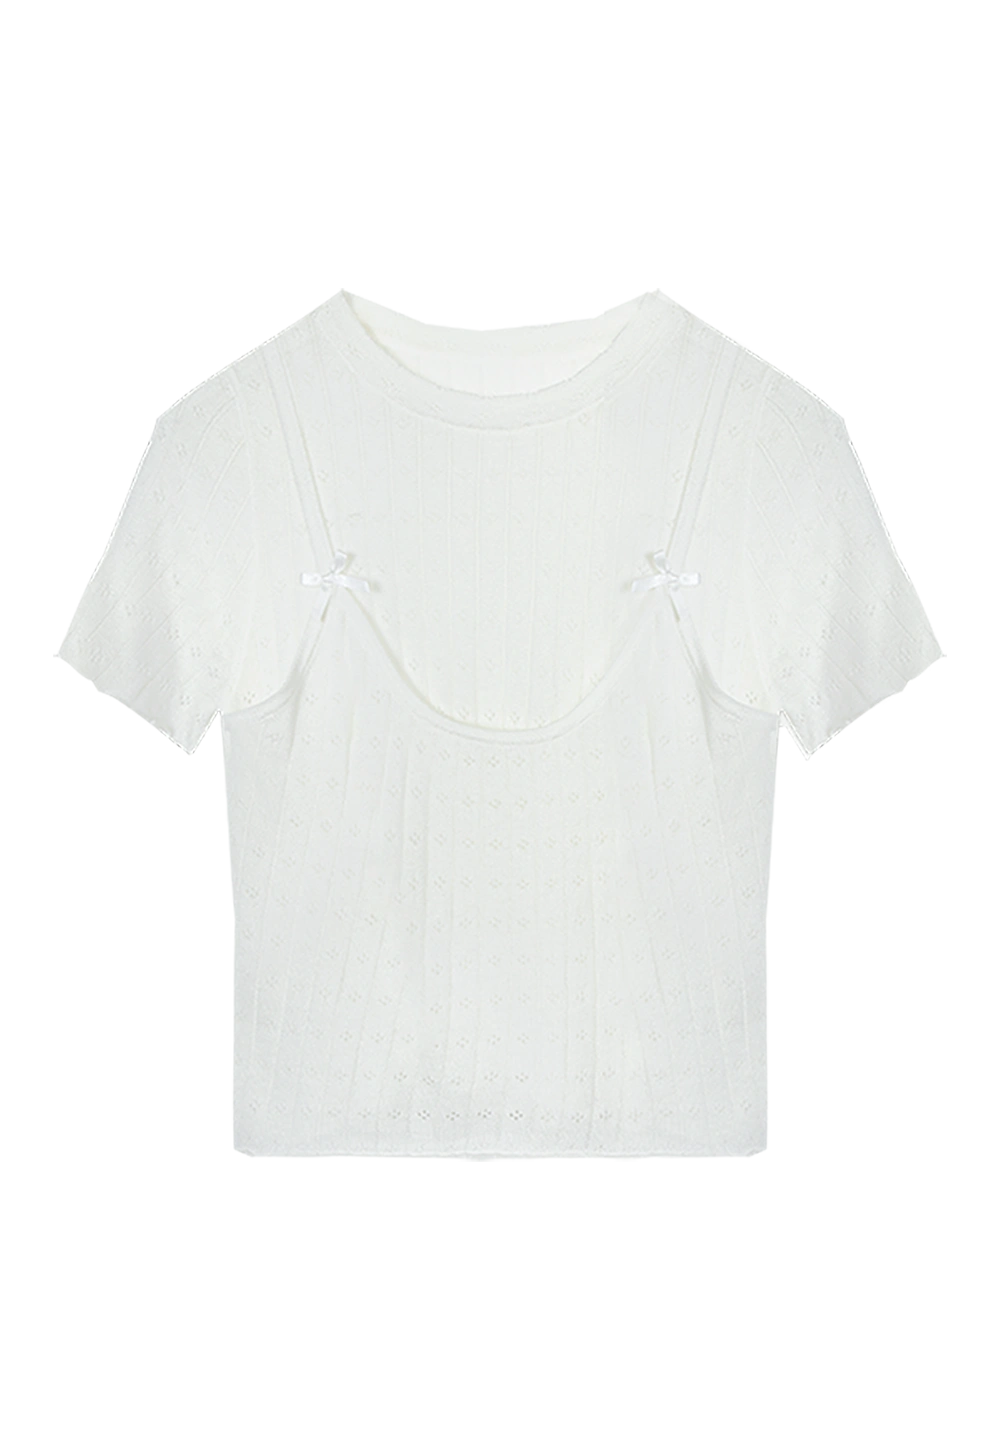 Women's Knit Short Sleeve Top with Embellished Neckline and Bow Details